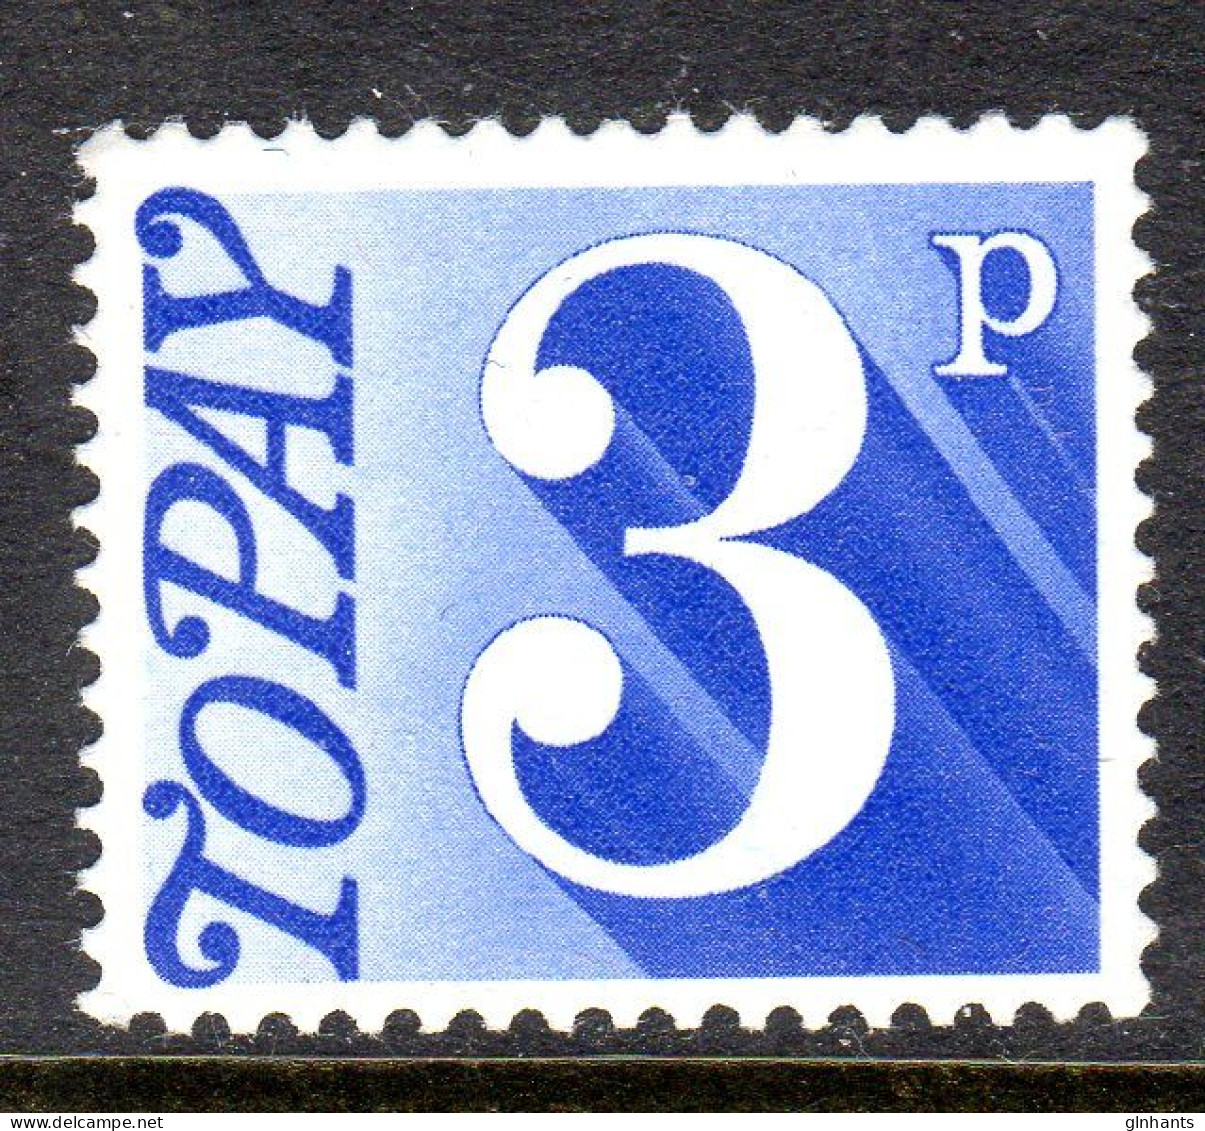 GREAT BRITAIN GB - 1970 POSTAGE DUE 3p STAMP FINE MNH ** SG D80 - Postage Due